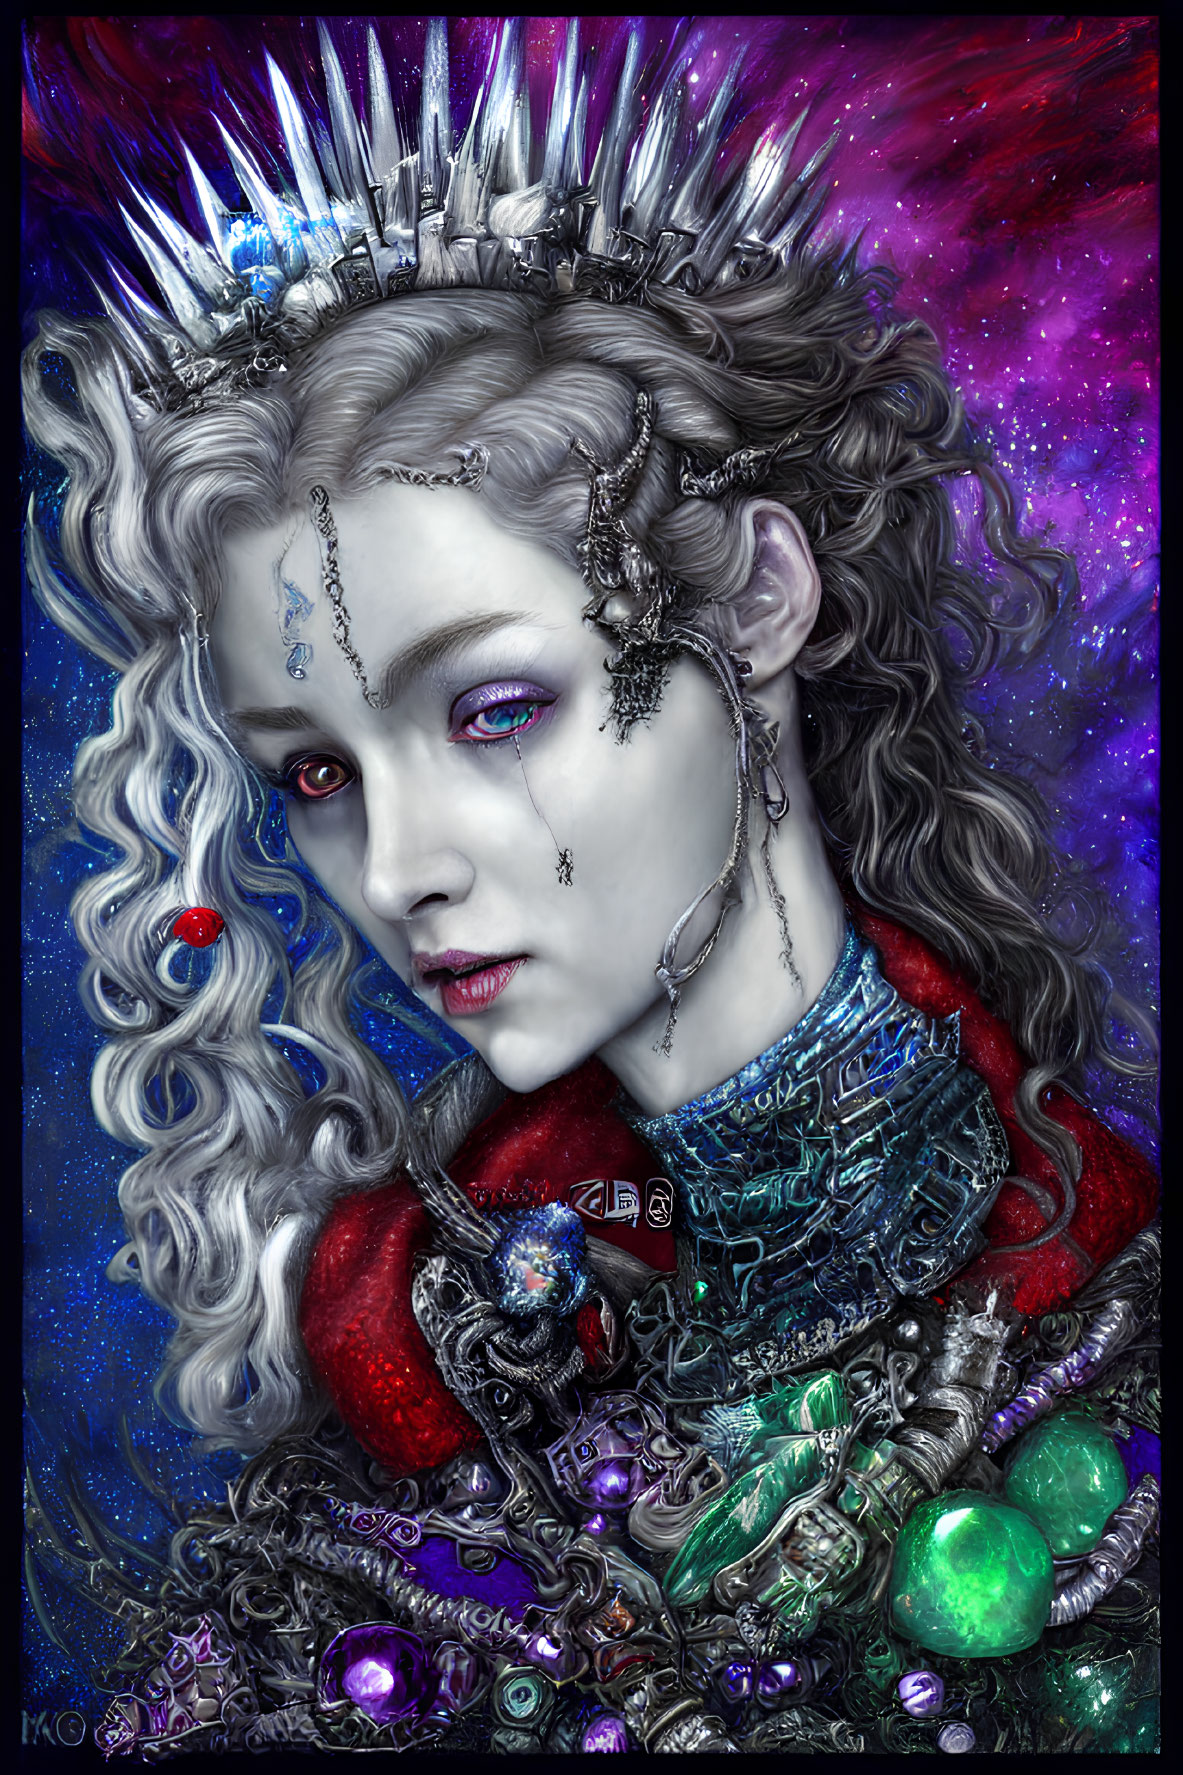 Illustrated female figure with crown and silver jewelry in cosmic setting.